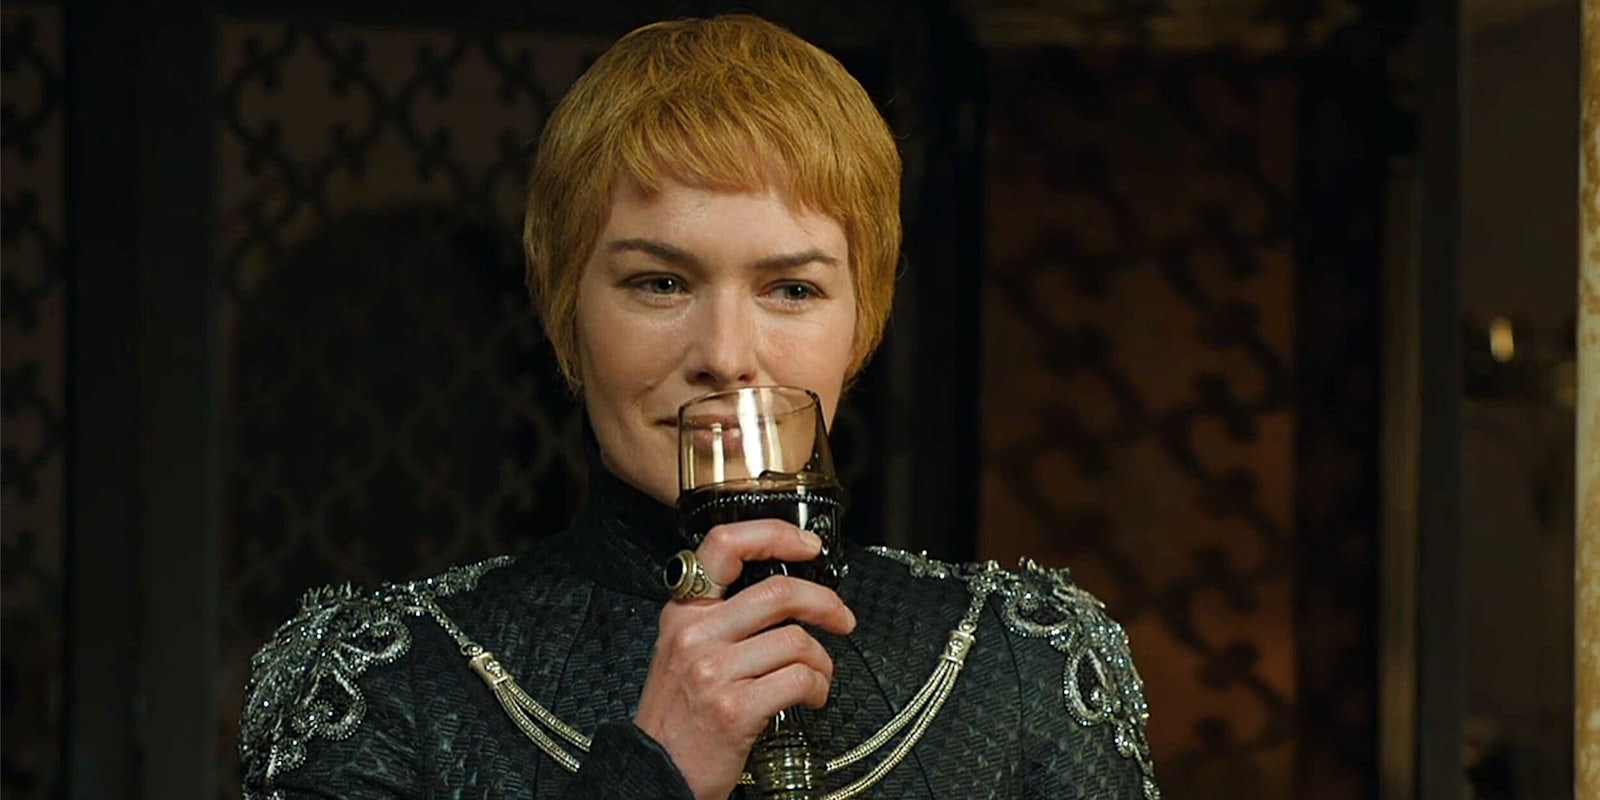 Cersei Lannister sipping wine while watching the Sept of Baelor burn